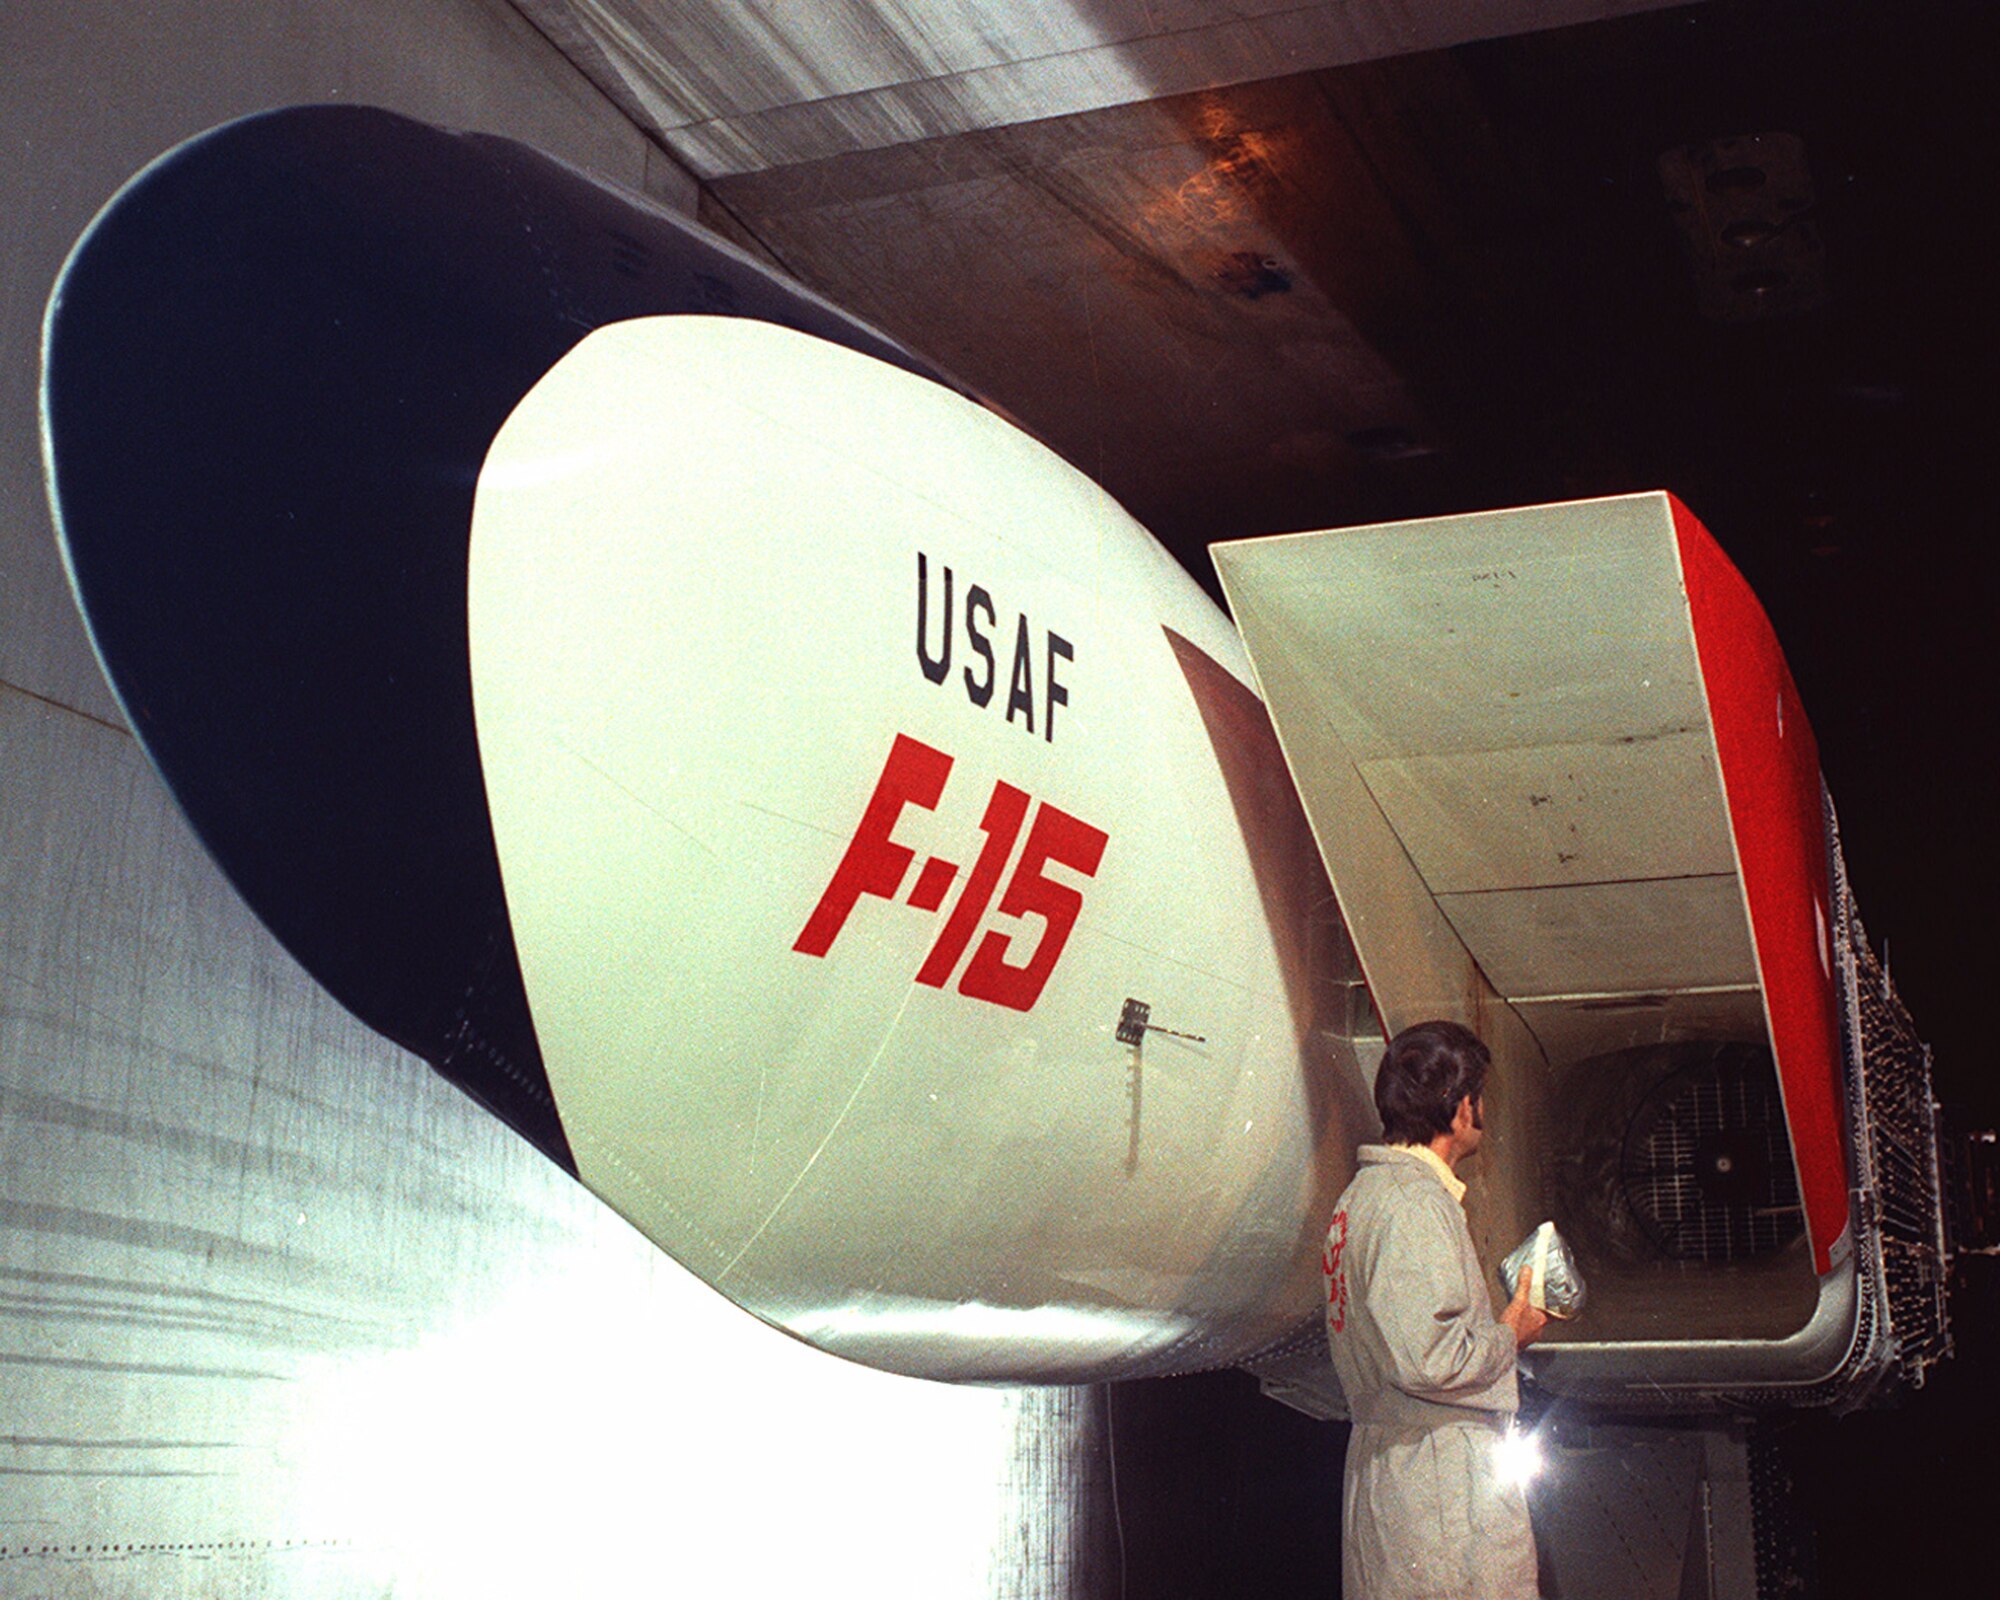 The compatibility of the Pratt & Whitney F100 engine to the variable geometry inlet of the F-15 Eagle is evaluated in 1972 in the 16-foot supersonic wind tunnel at Arnold Air Force Base, Tennessee, headquarters of Arnold Engineering Development Complex. Since the test section was not large enough to accommodate a full-sized nose section, a special fuselage segment designed to produce inlet airflow conditions the F-15 would encounter in flight was installed in the wind tunnel. The test hardware was cycled through a wide range of altitude and speed conditions. The Air Force recently celebrated the 50th anniversary of the F-15’s deployment. Models of the aircraft, engines and other F-15 components have frequently been tested by AEDC over the past 50 years. (U.S. Air Force photo)